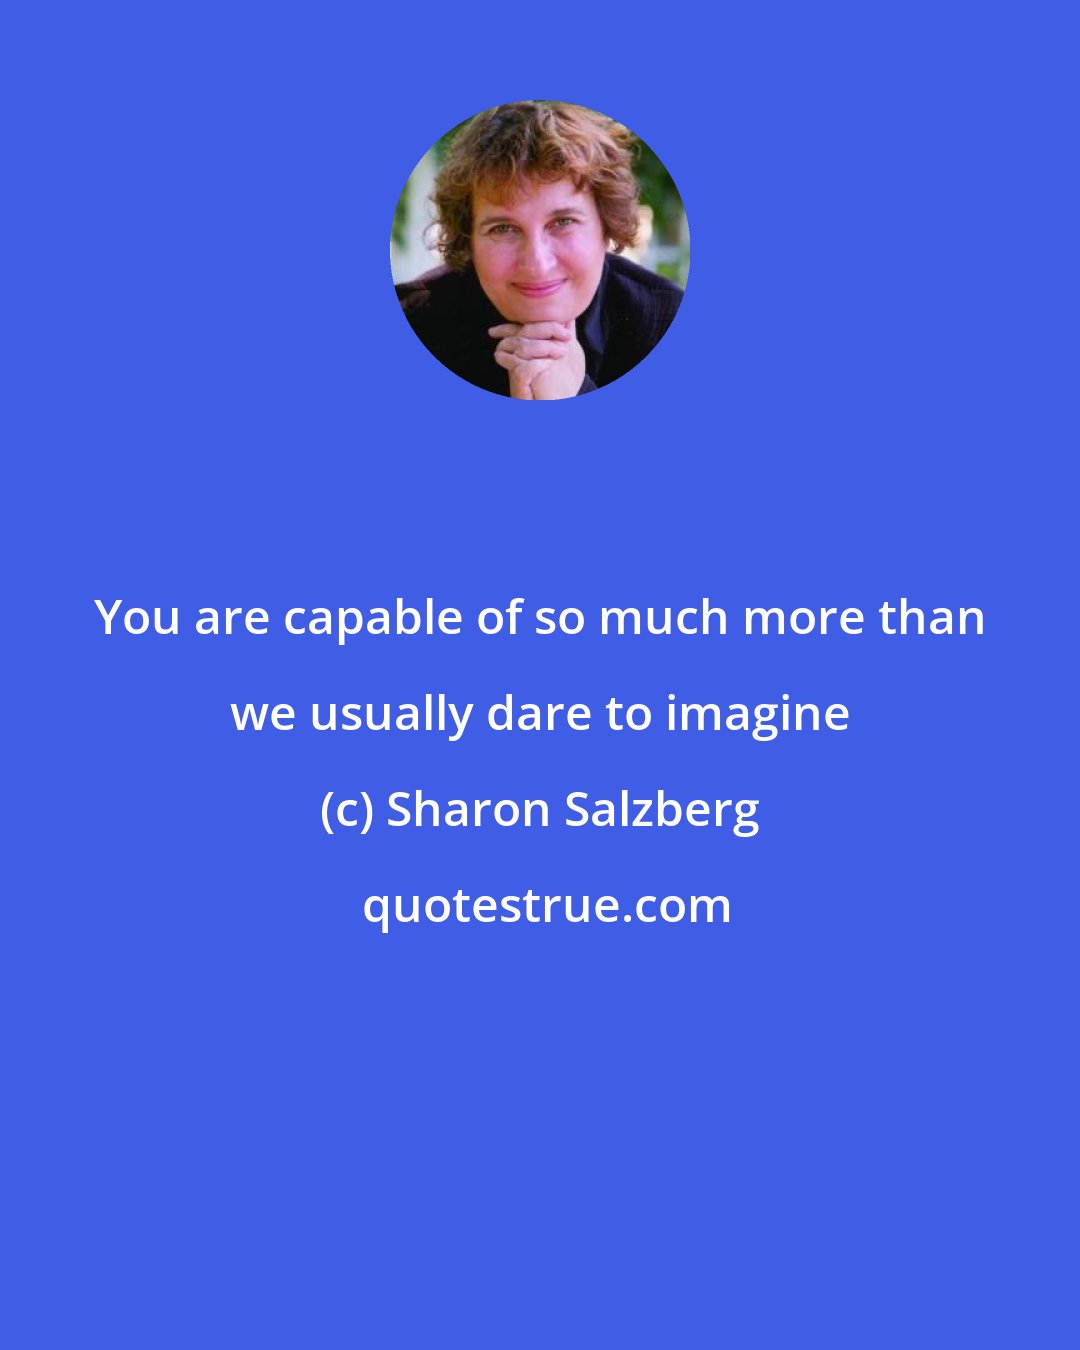 Sharon Salzberg: You are capable of so much more than we usually dare to imagine